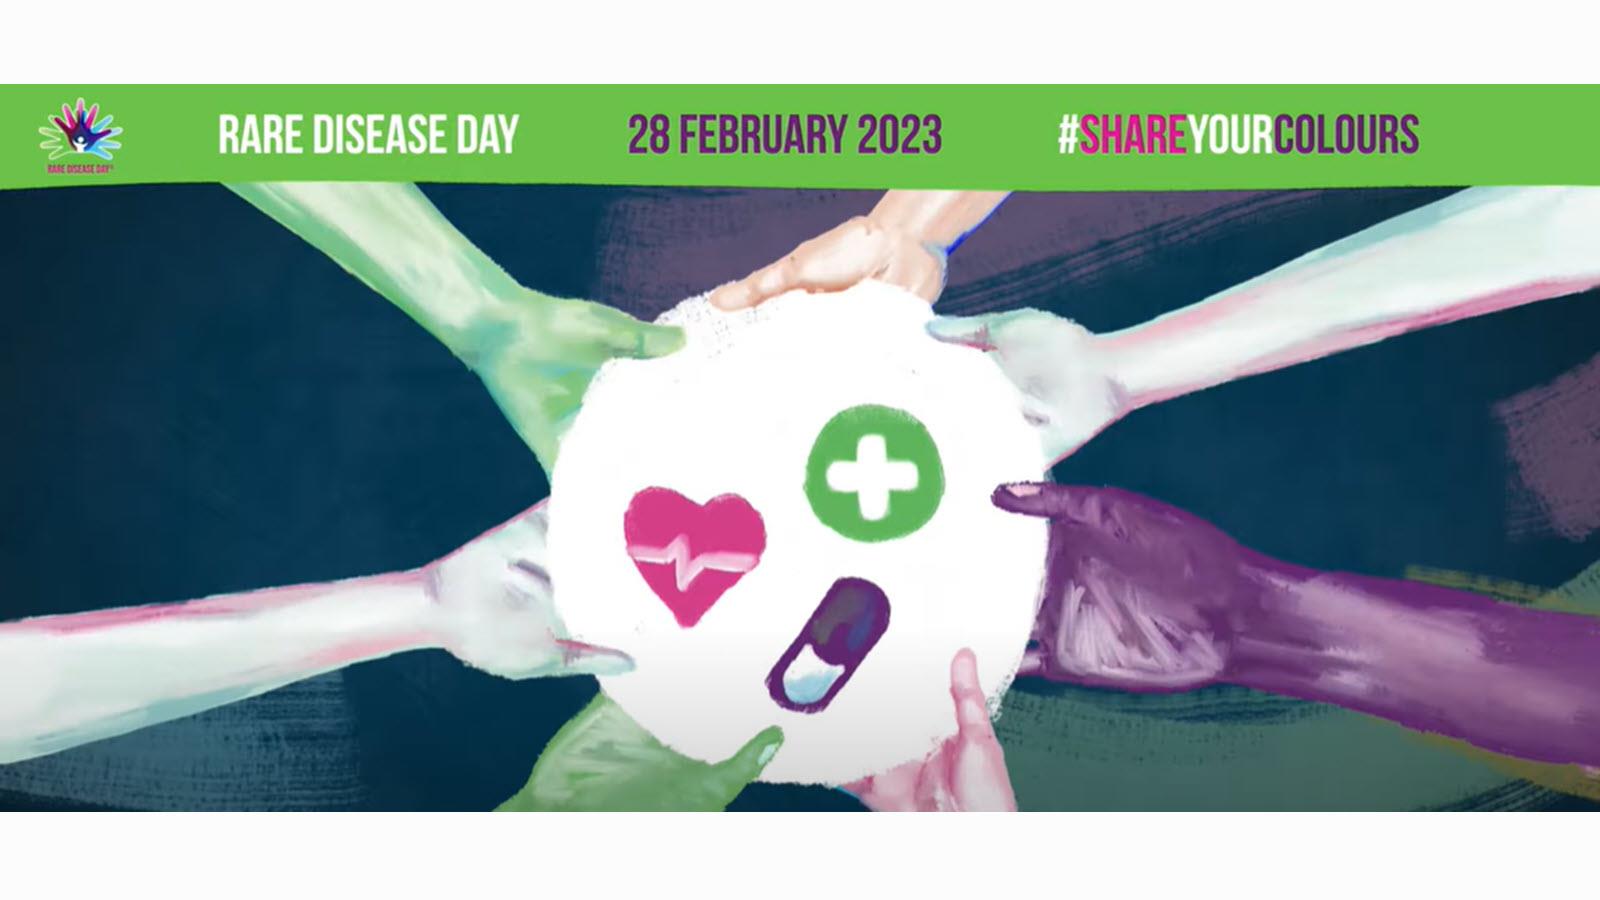 Hands joining together to support Rare Disease Day 2023